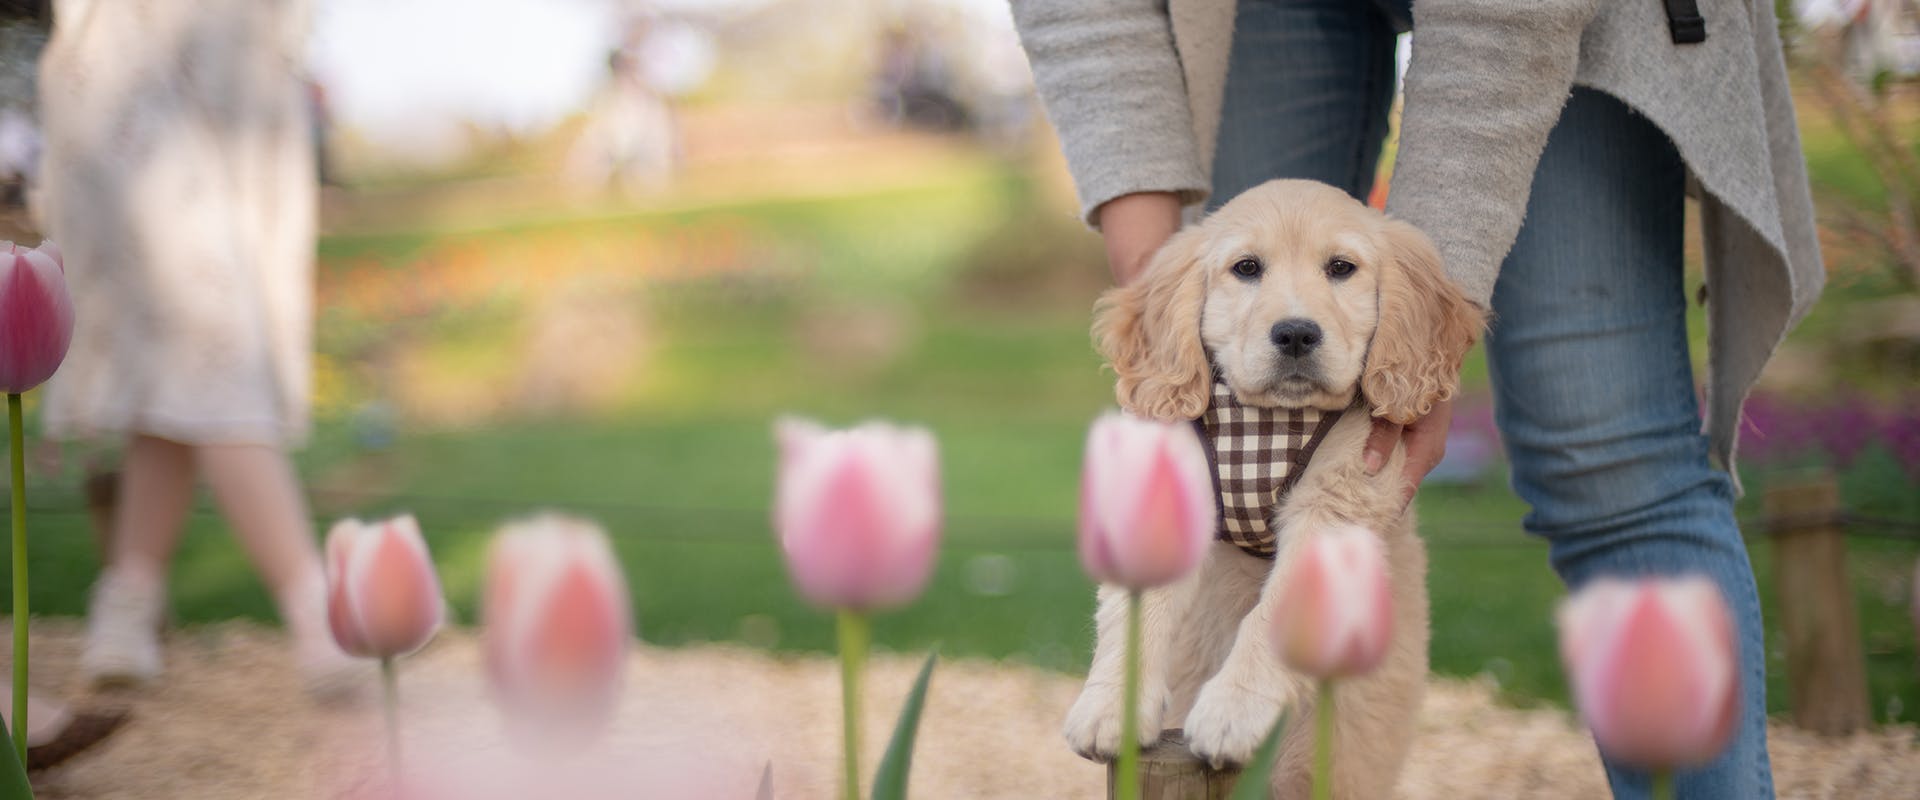 A person holding a small puppy in front of a bed of tulips while out on a walk